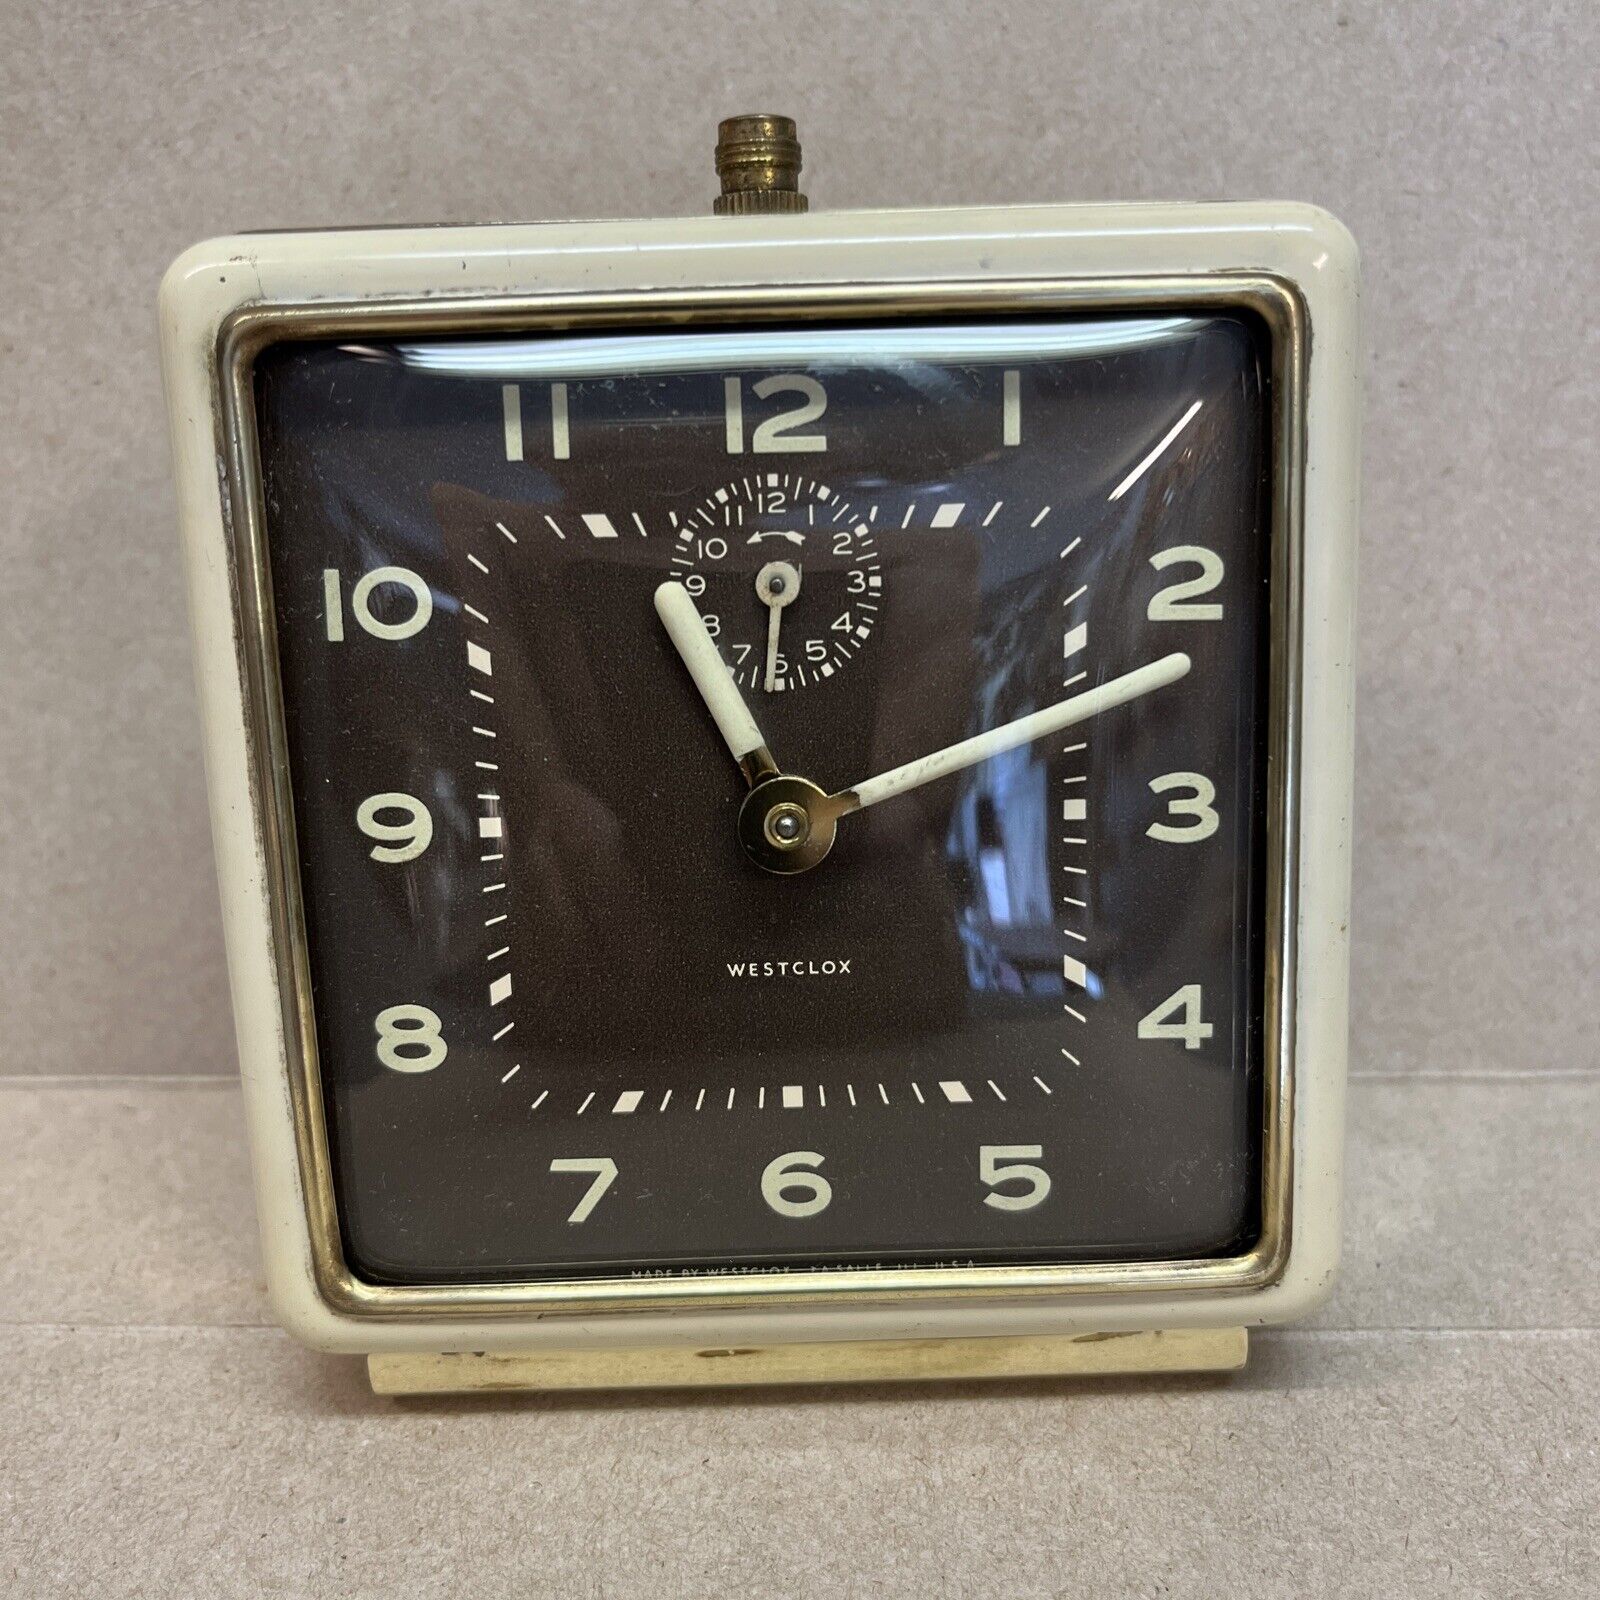 Vintage WEXTCLOX Beige Gold General Time Square ALARM CLOCK (USA+WORKS)